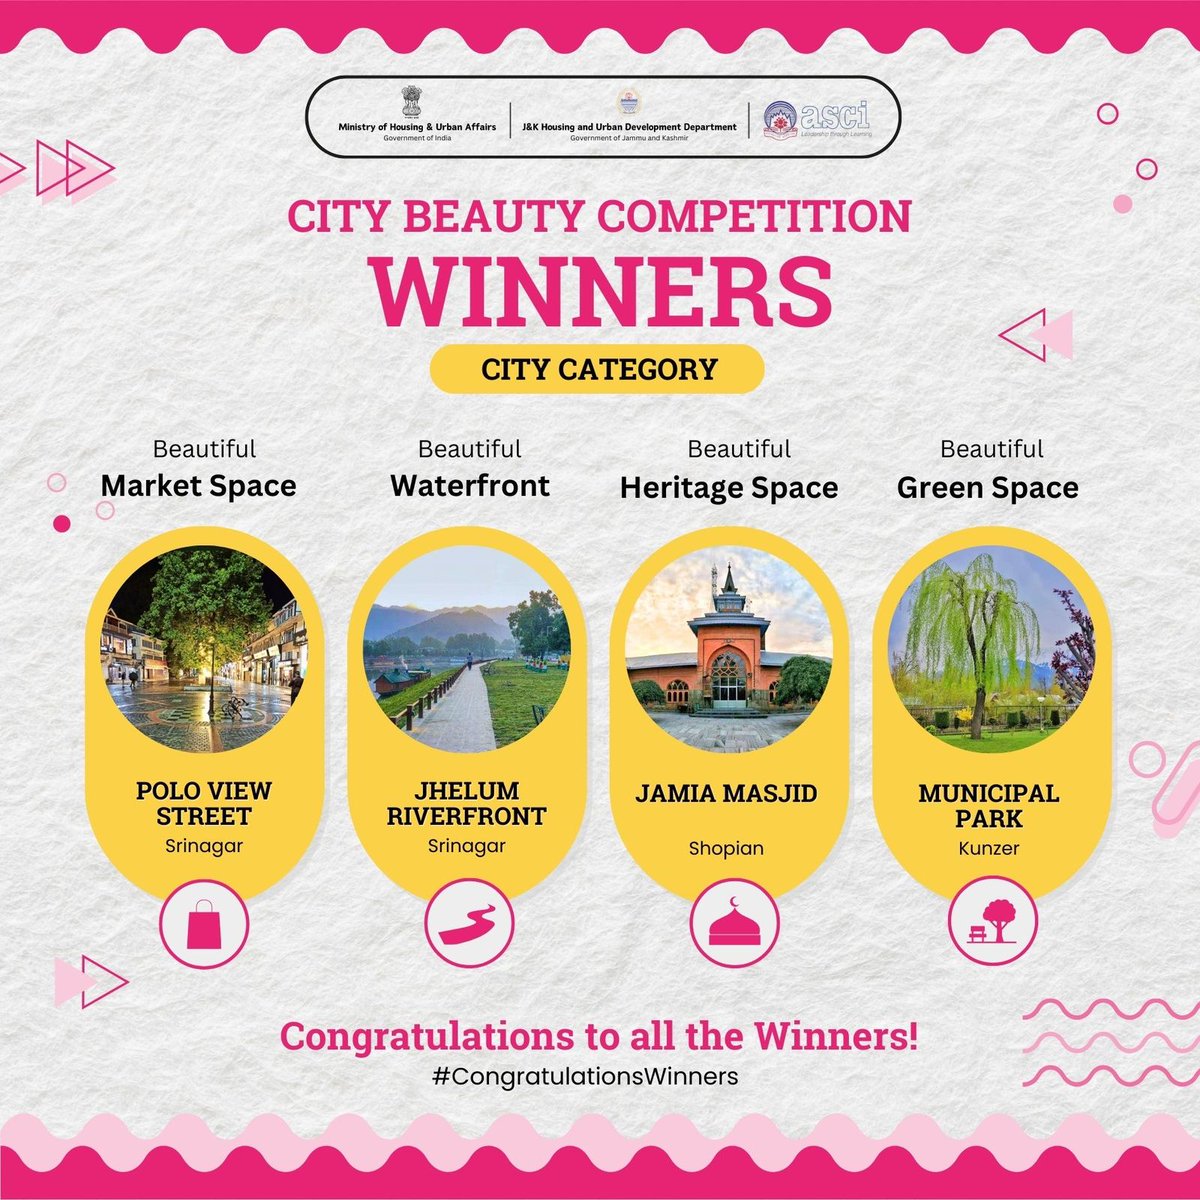 To promote cleanliness and beautification, @MoHUA_India has organized State and National  Level City  Beauty Competition to celebrate the beauty and diversity of our #UrbanAreas. Polo View Market in Srinagar has been recognized as a #BeautifulMarketPlace, the Jehlum River Front